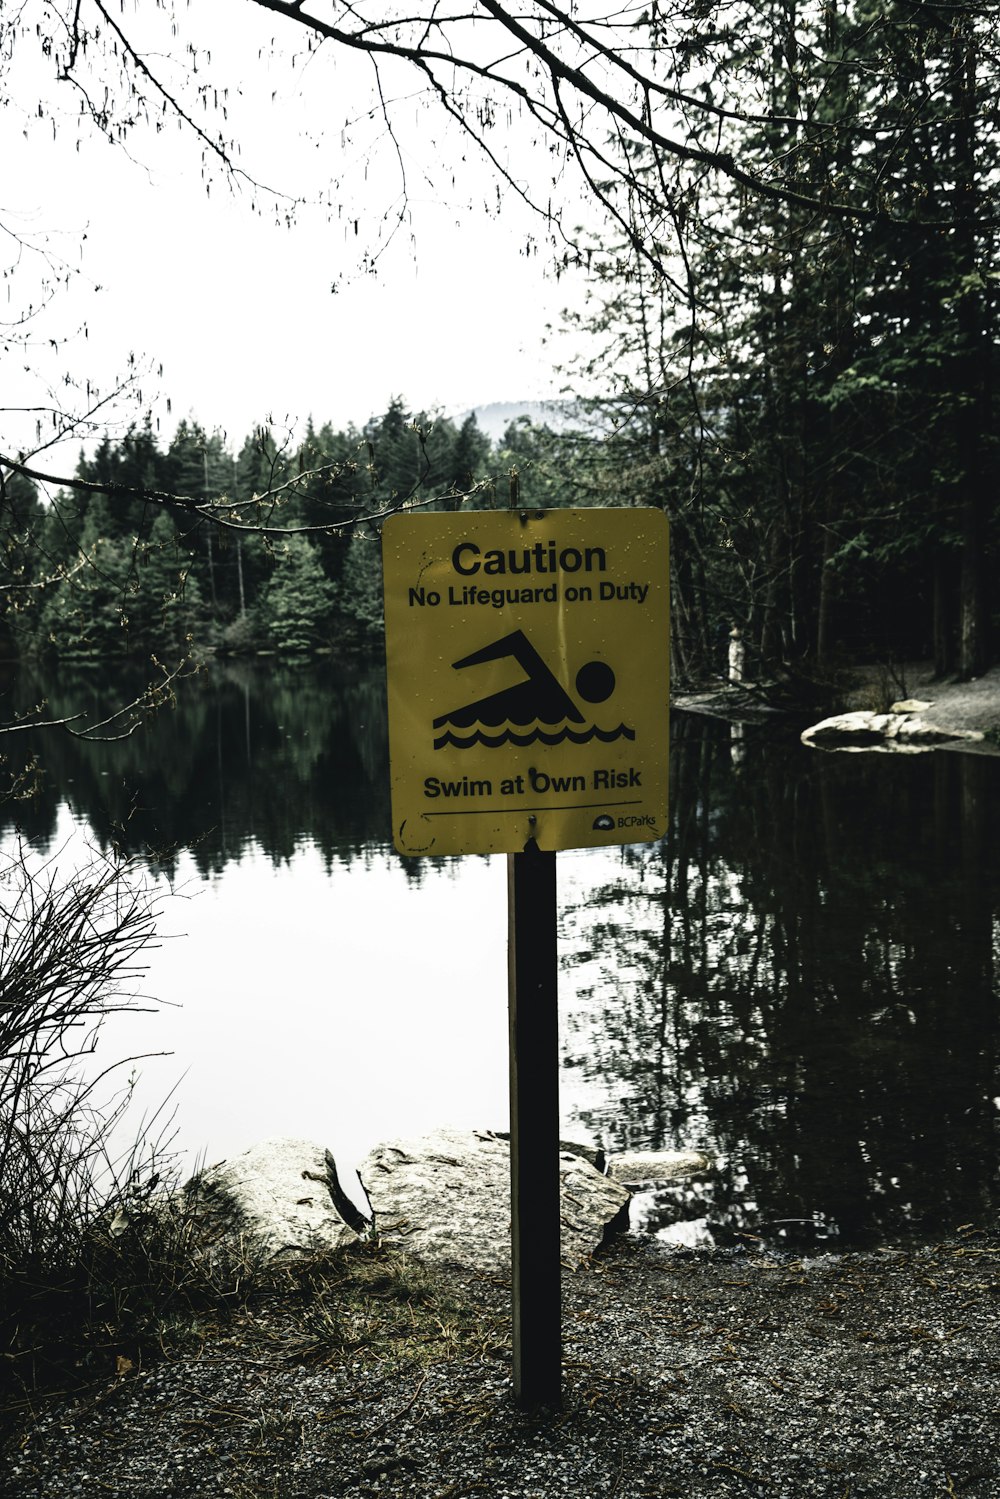 a caution sign is posted near a body of water